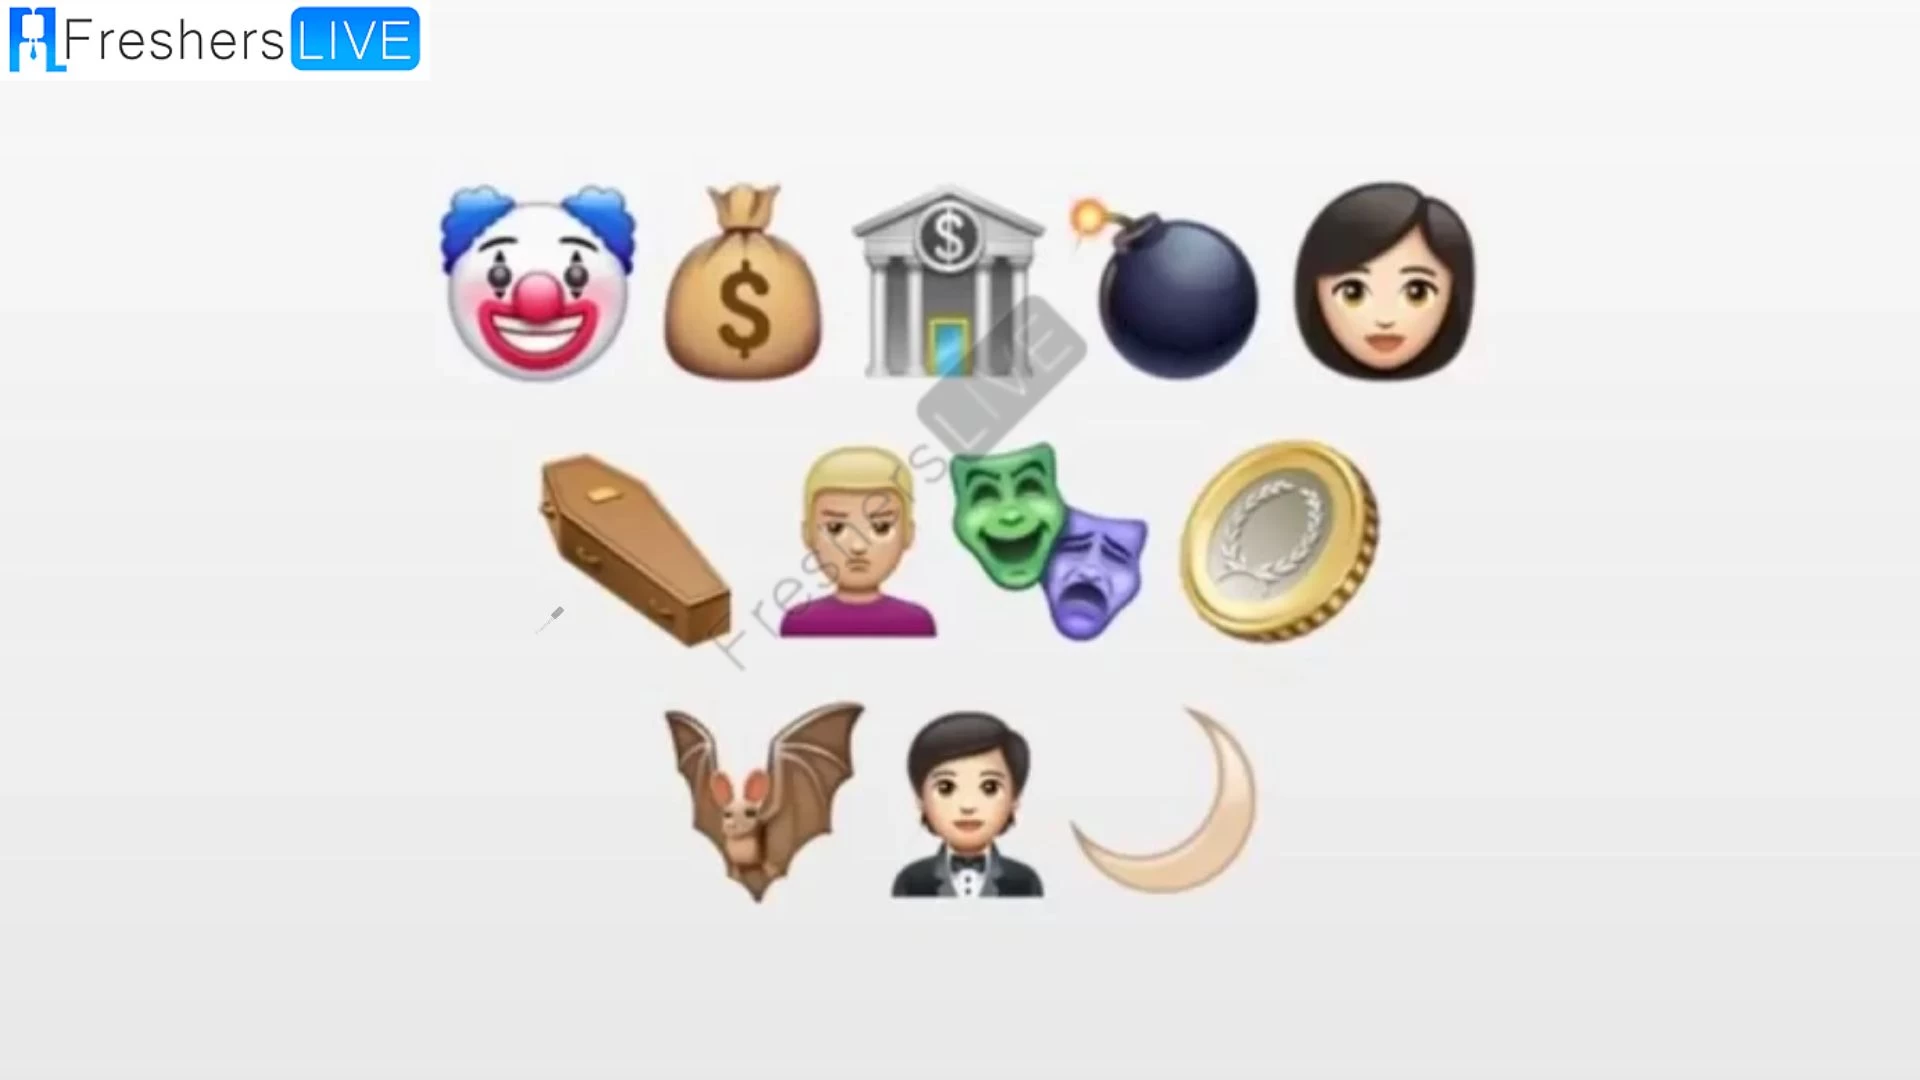 Only 20% of People Can Guess the Movie Title from Emoji Riddles!